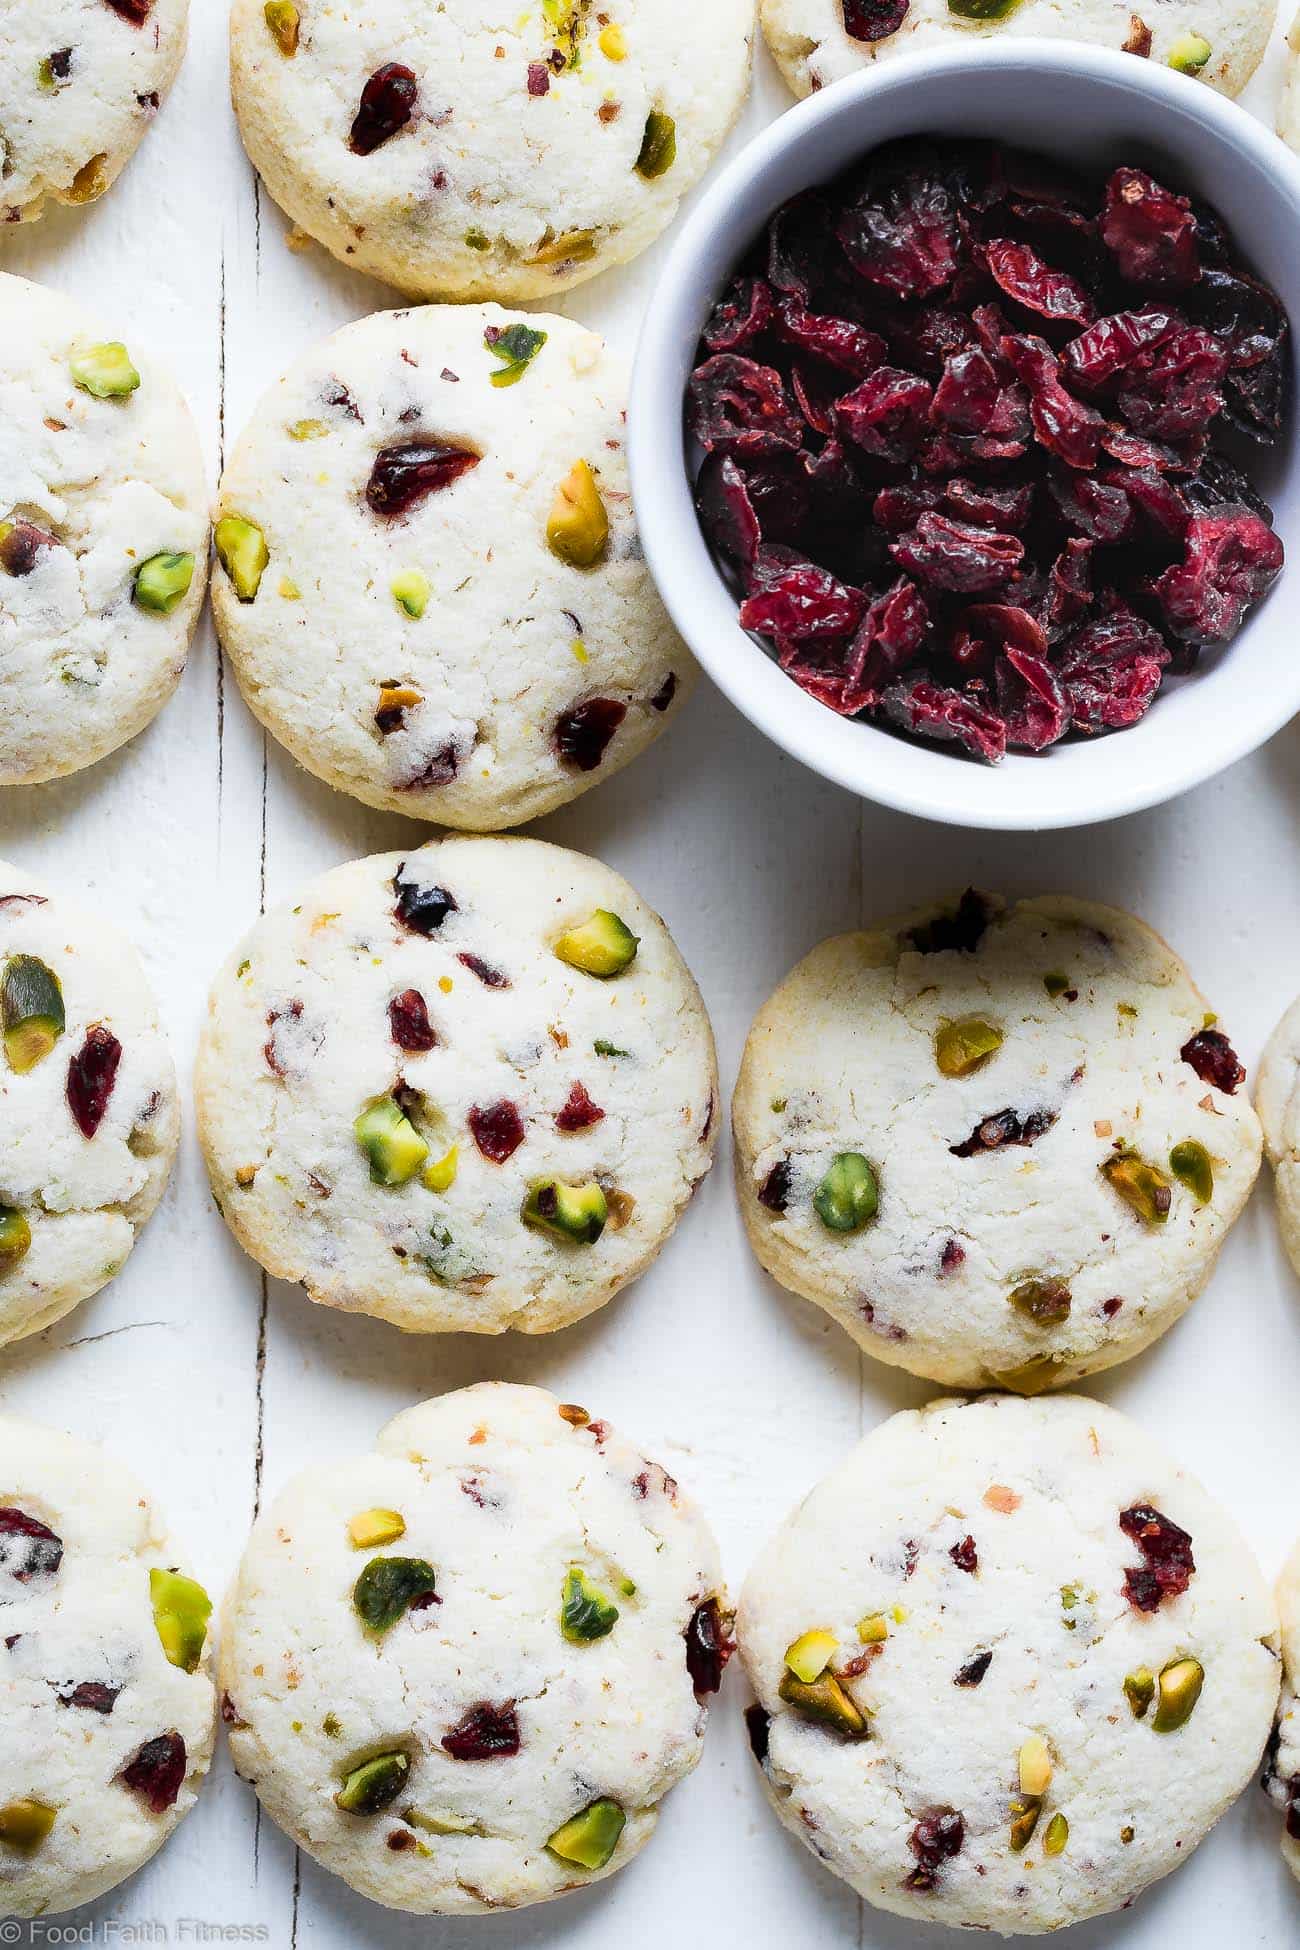 Chewy Gluten Free Sugar Free Sugar Cookies Recipe - These quick and easy, CHEWY sugar free cookies have tangy and crunchy cranberries and pistachios! They're a healthier Christmas treat for only 95 calories! | Foodfaithfitness.com | @FoodFaithFit